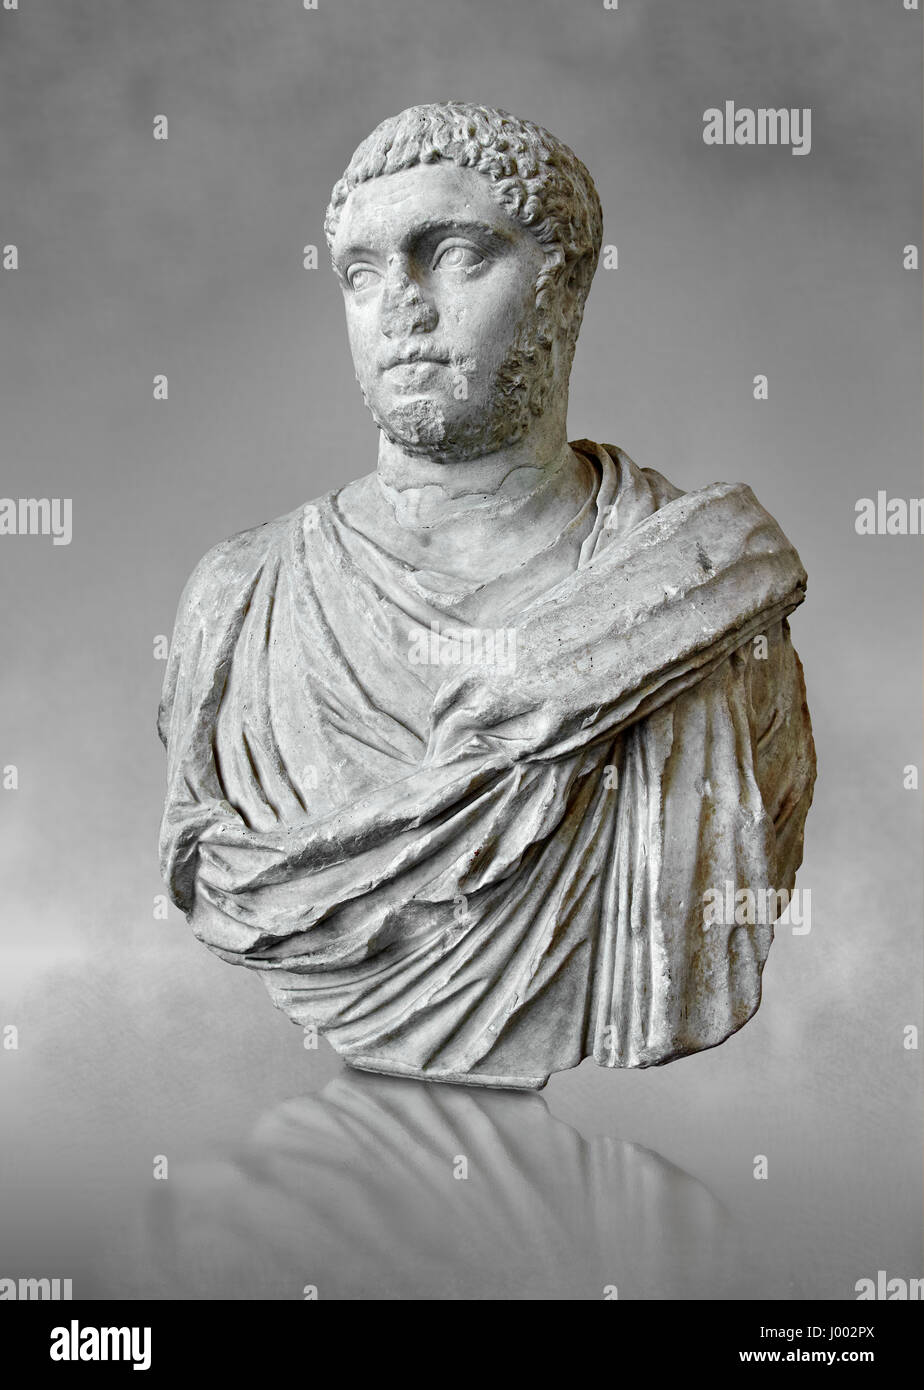 Roman sculpture bust of Publius Septimius Antoninus Geta better known as Geta brother of Caracalla, made between 209 and 212 AD and excavated from the Stock Photo